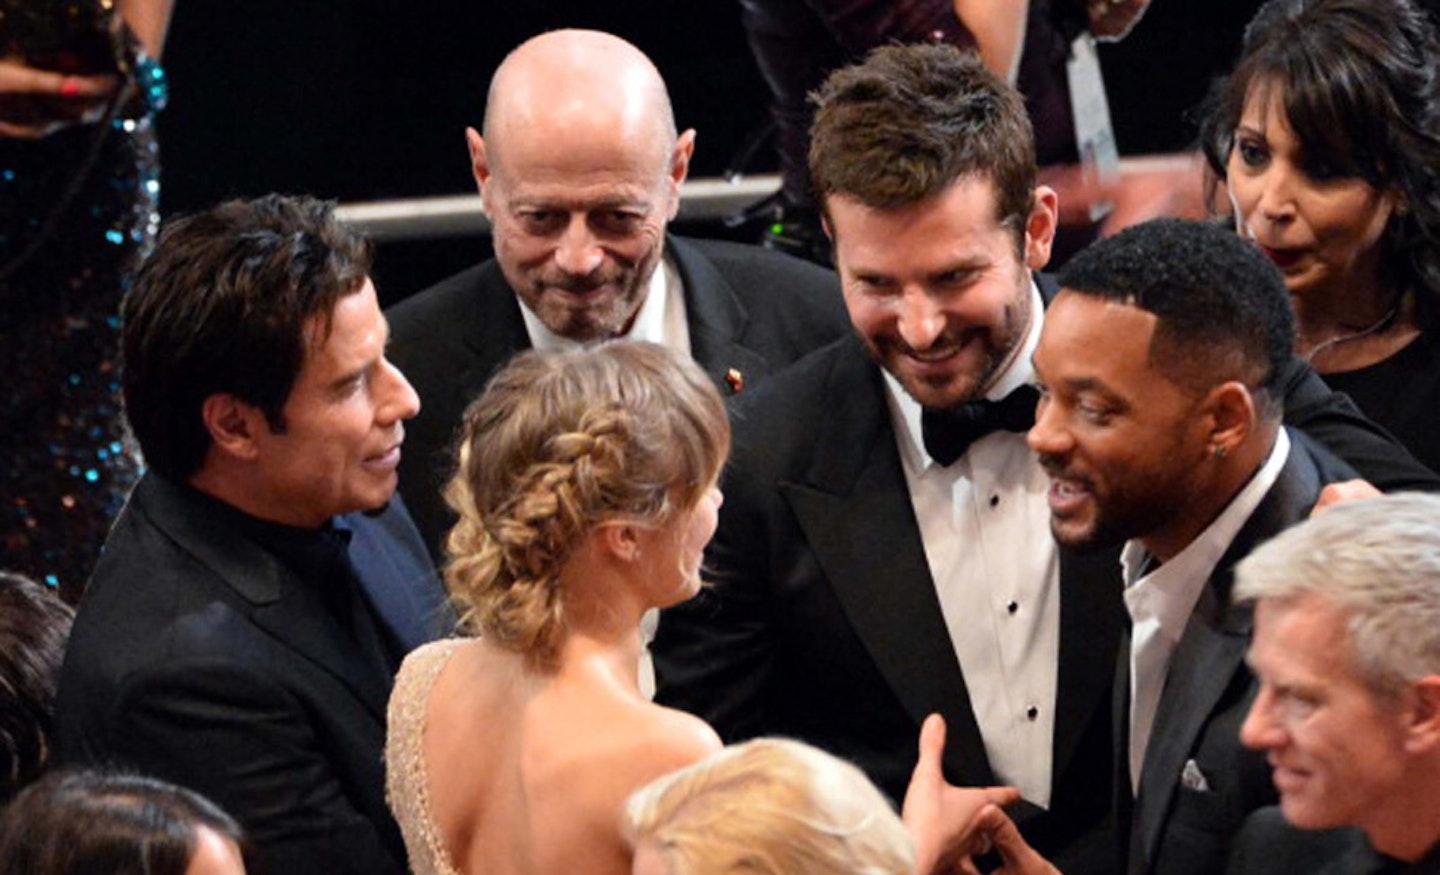 Bradley Cooper and Suki Waterhouse at the Oscars, March 2014